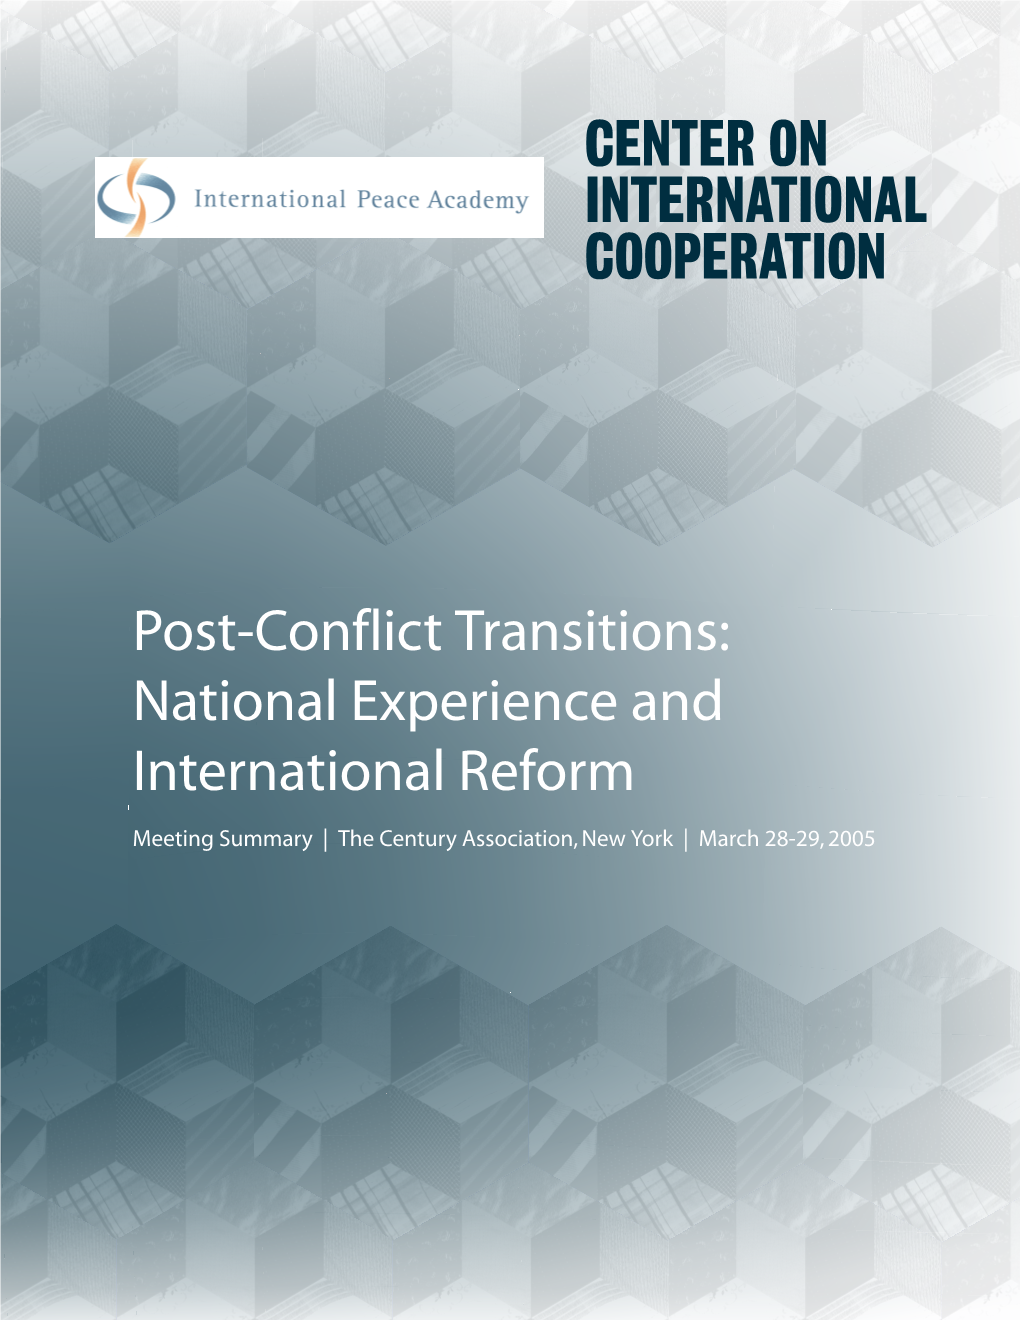 Post-Conflict Transitions: National Experience and International Reform